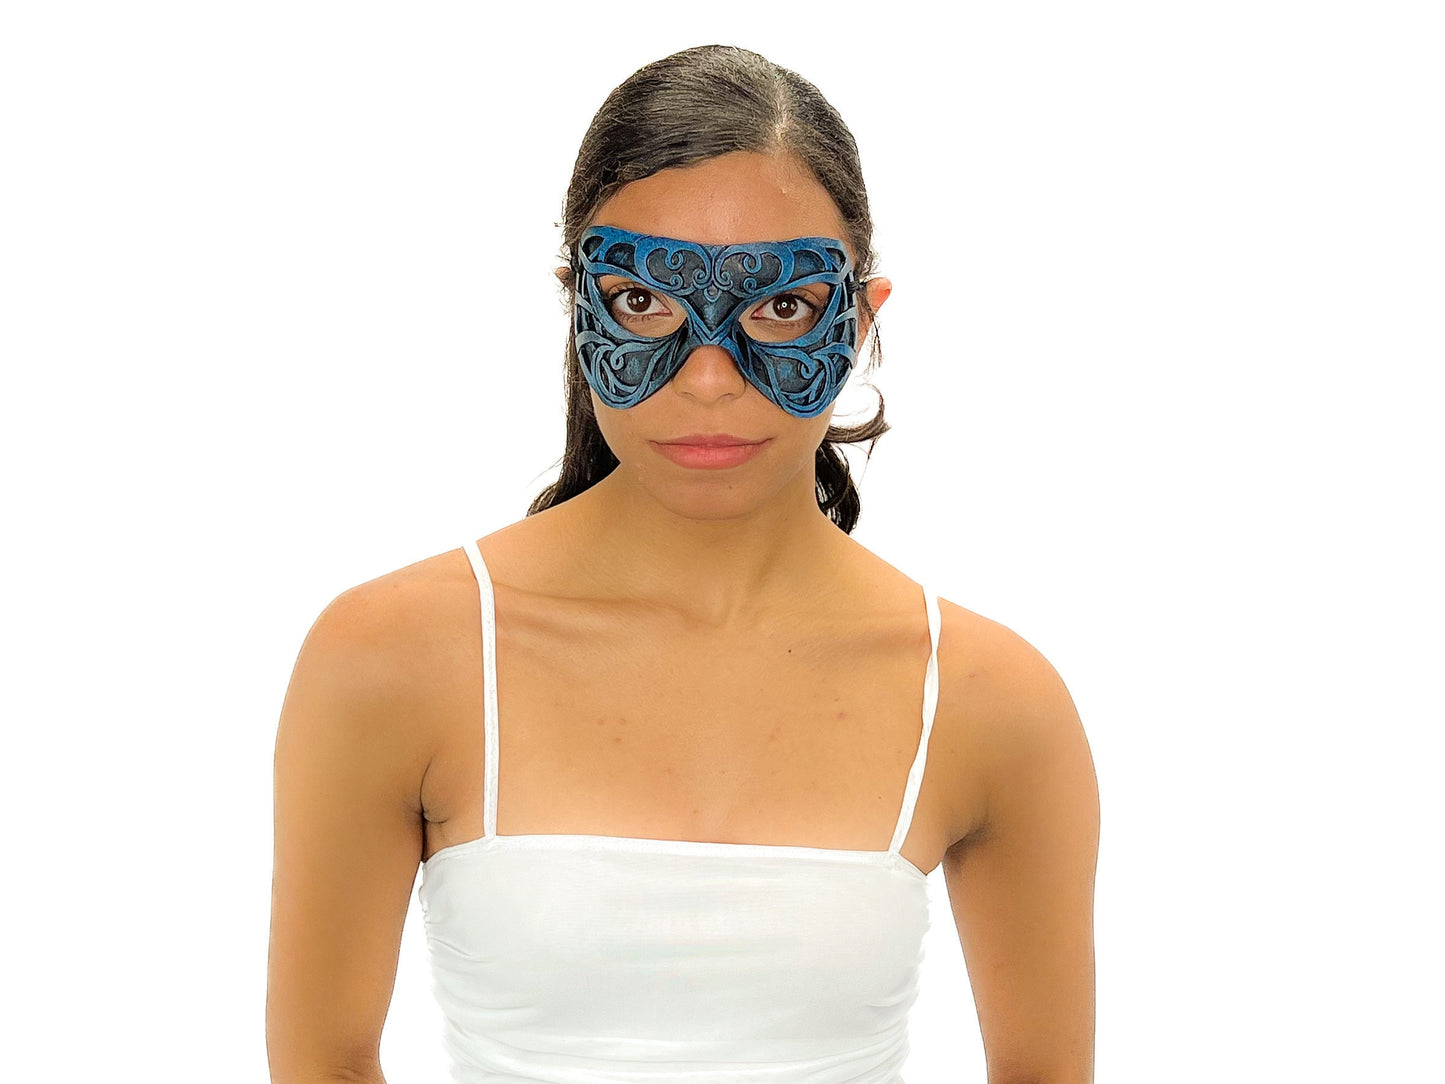 Dual Layer Ornate Masquerade Handmade Genuine Leather Eye Mask in Blue and Black